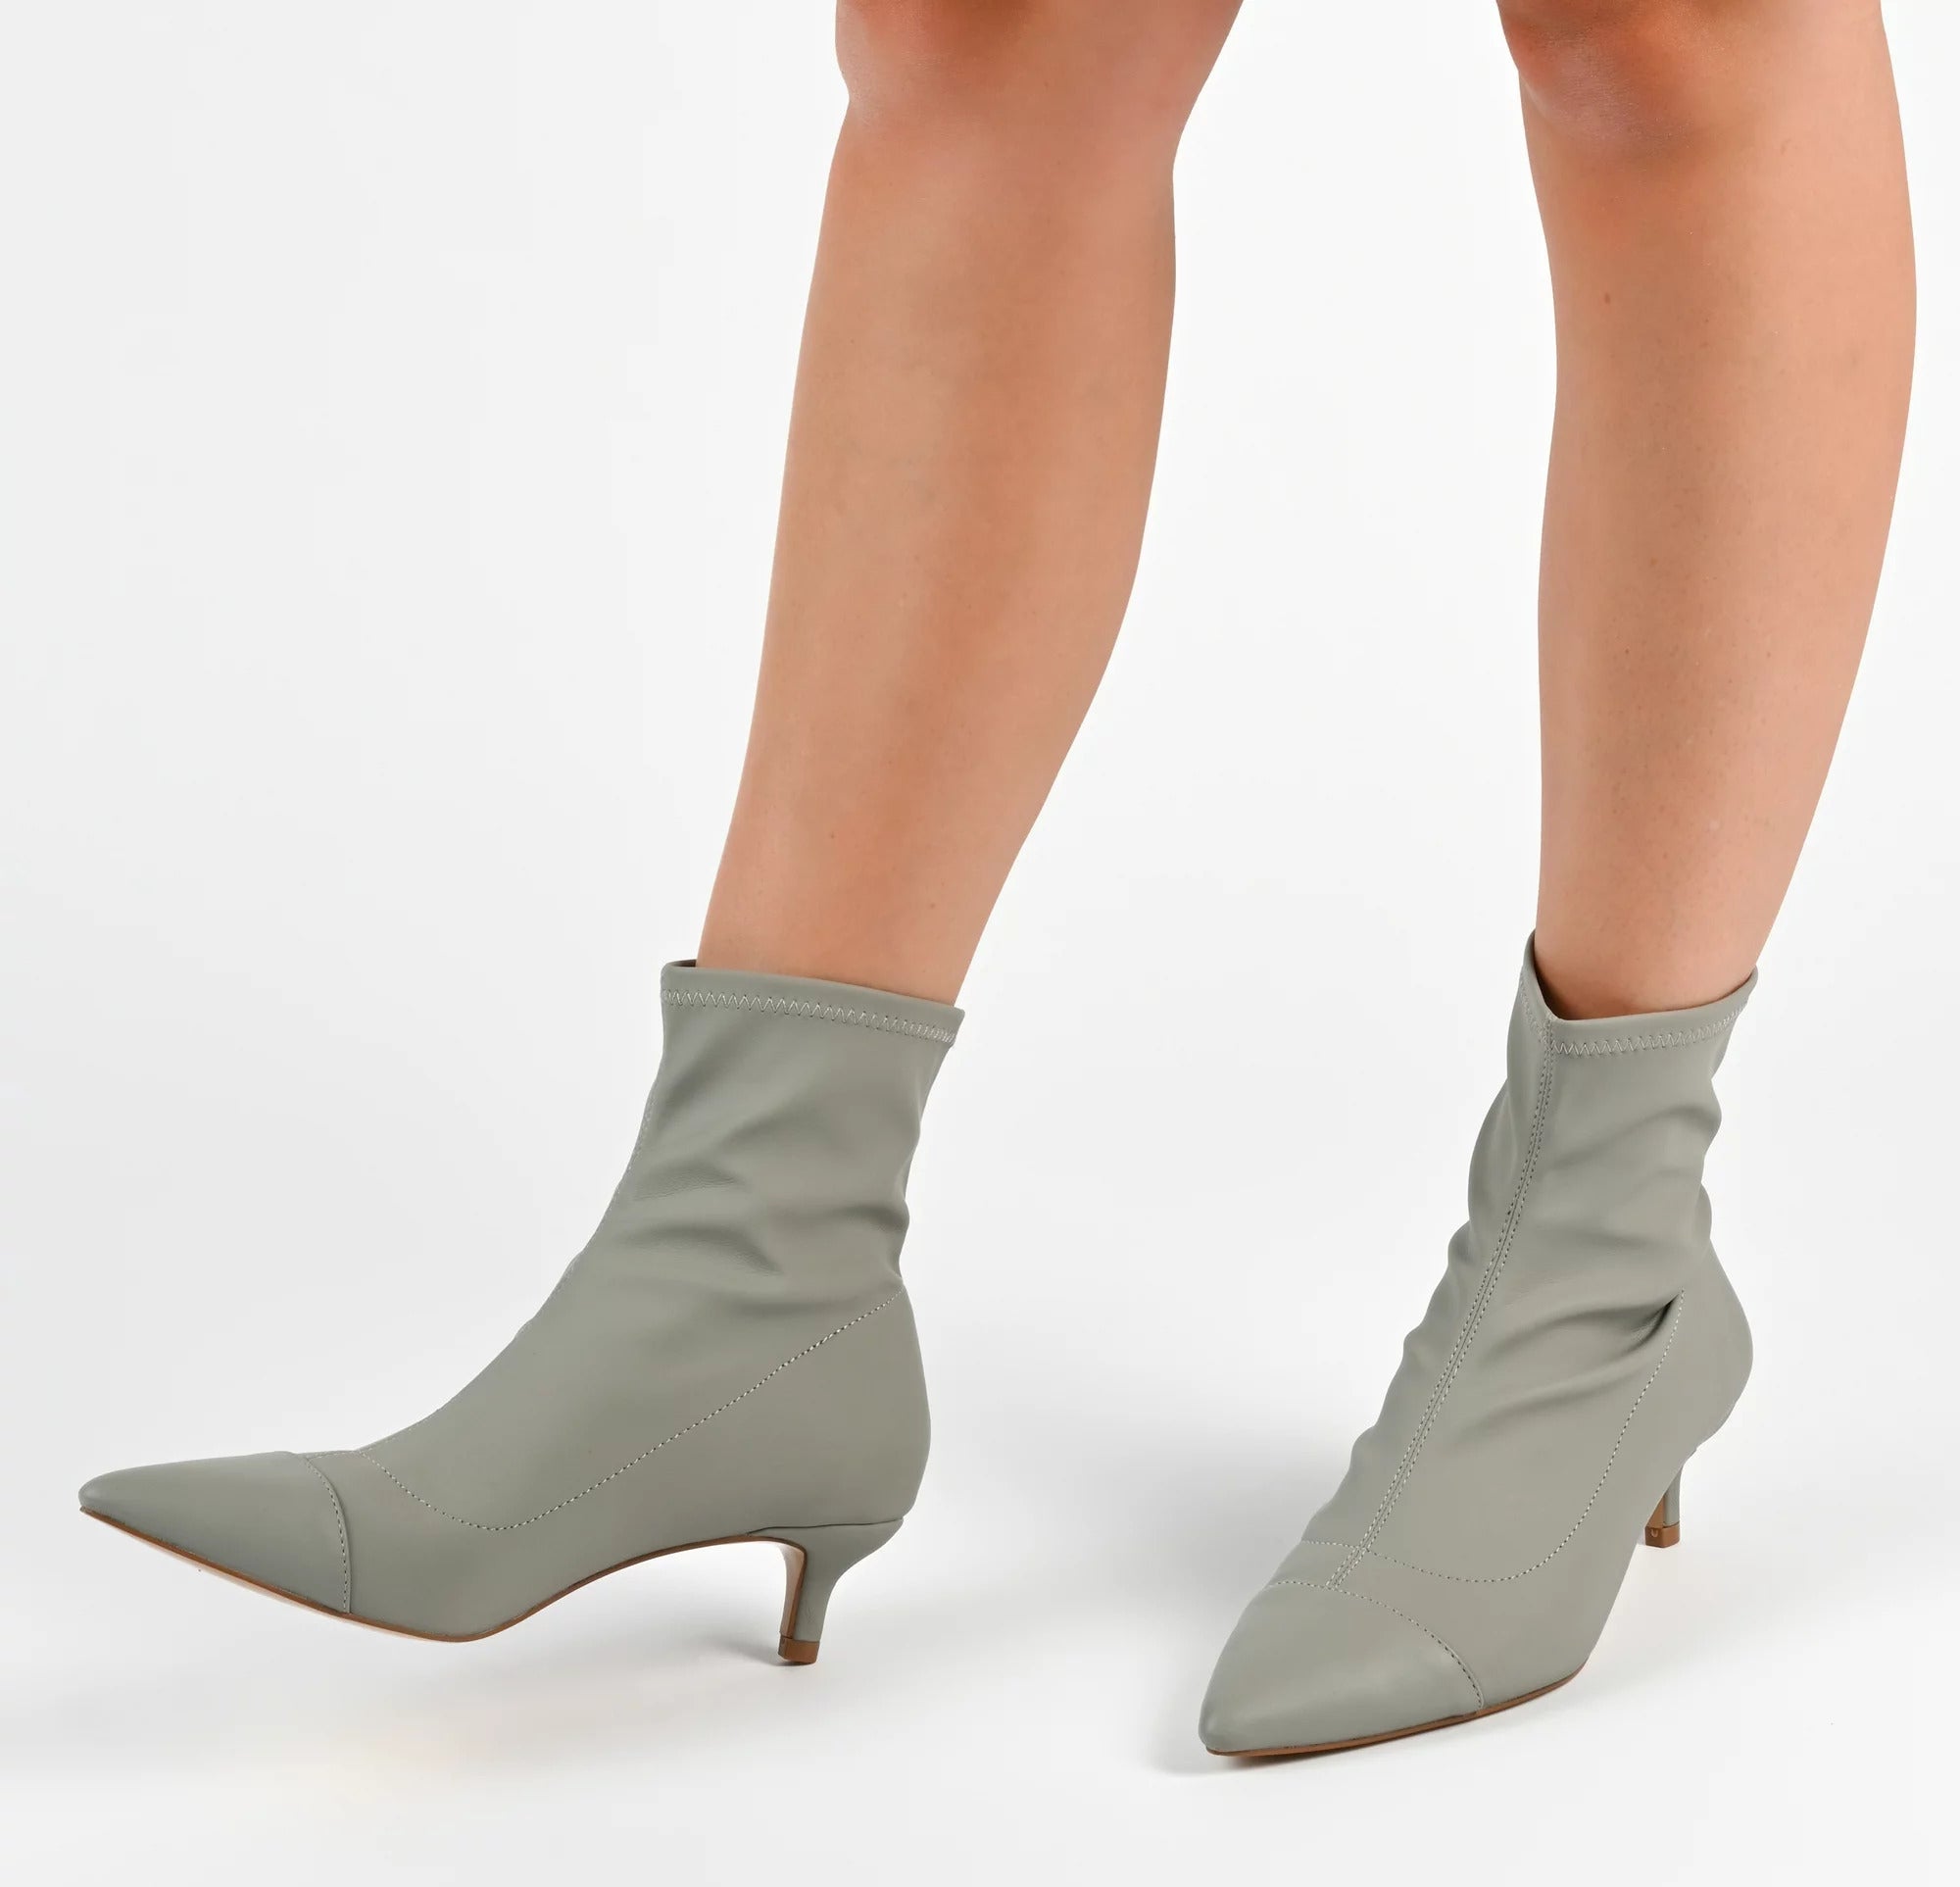 A model wearing the boots in gray